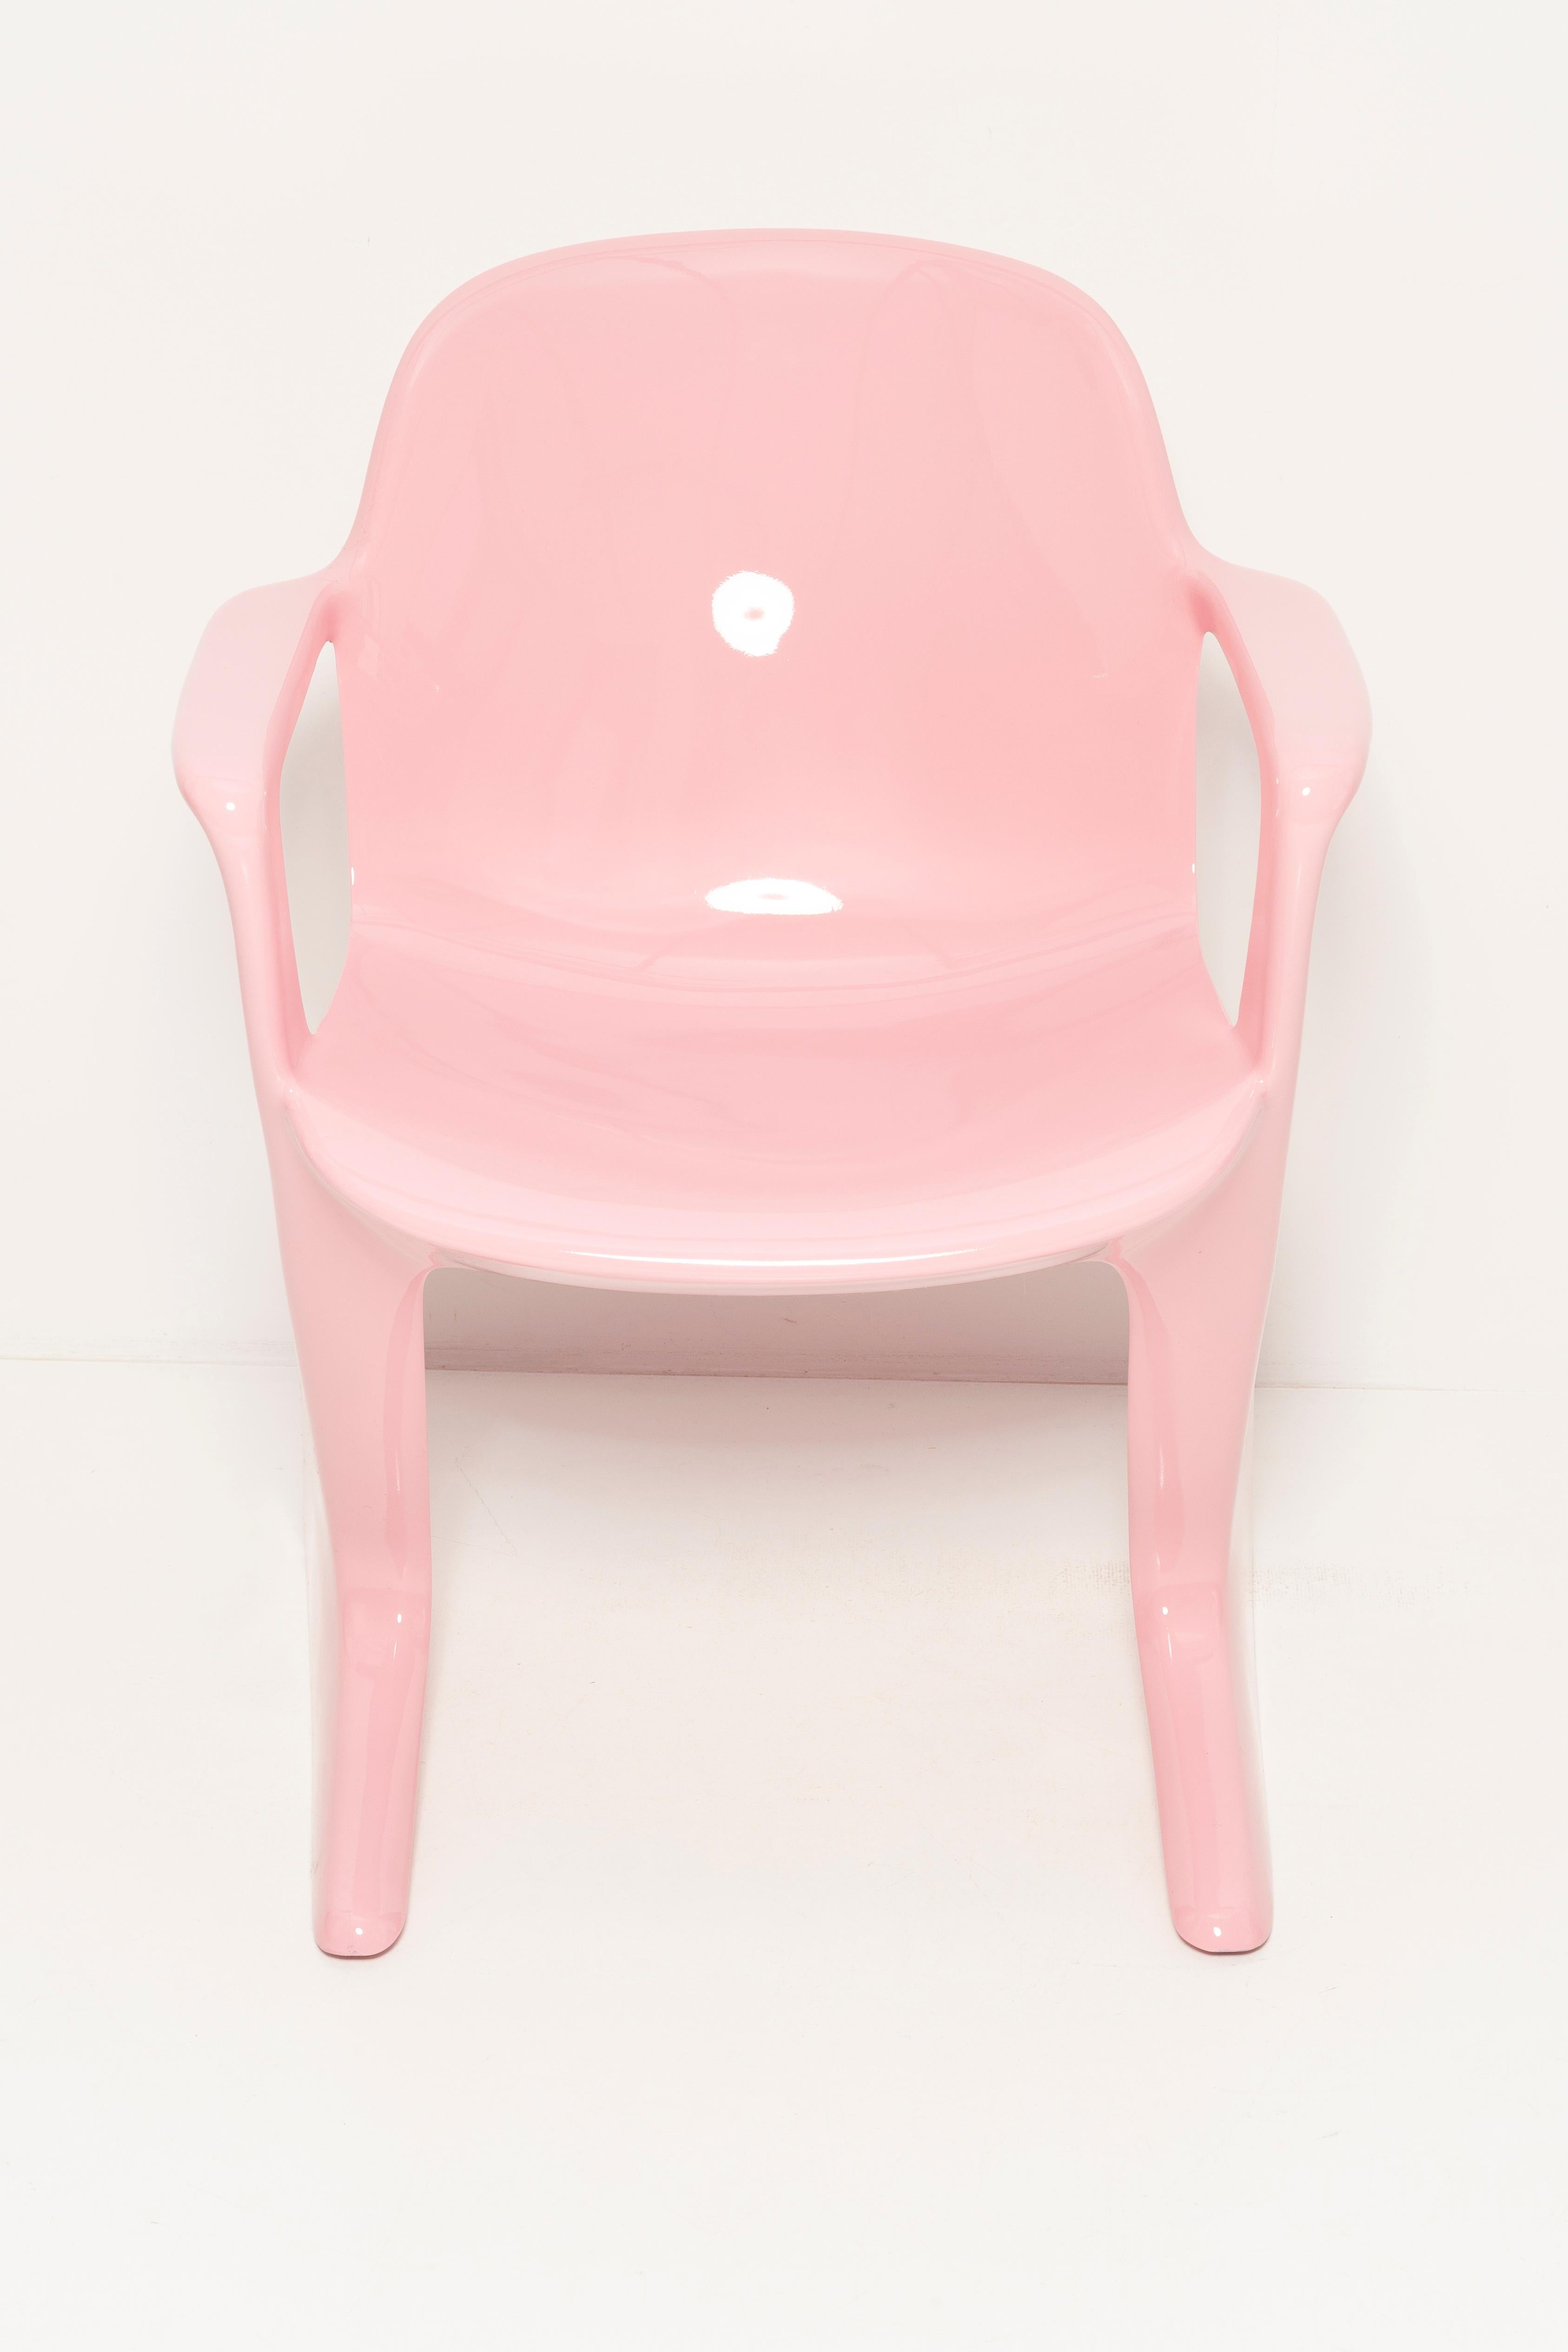 Mid-Century Light Pink Kangaroo Chair Designed by Ernst Moeckl, Germany, 1968 For Sale 5